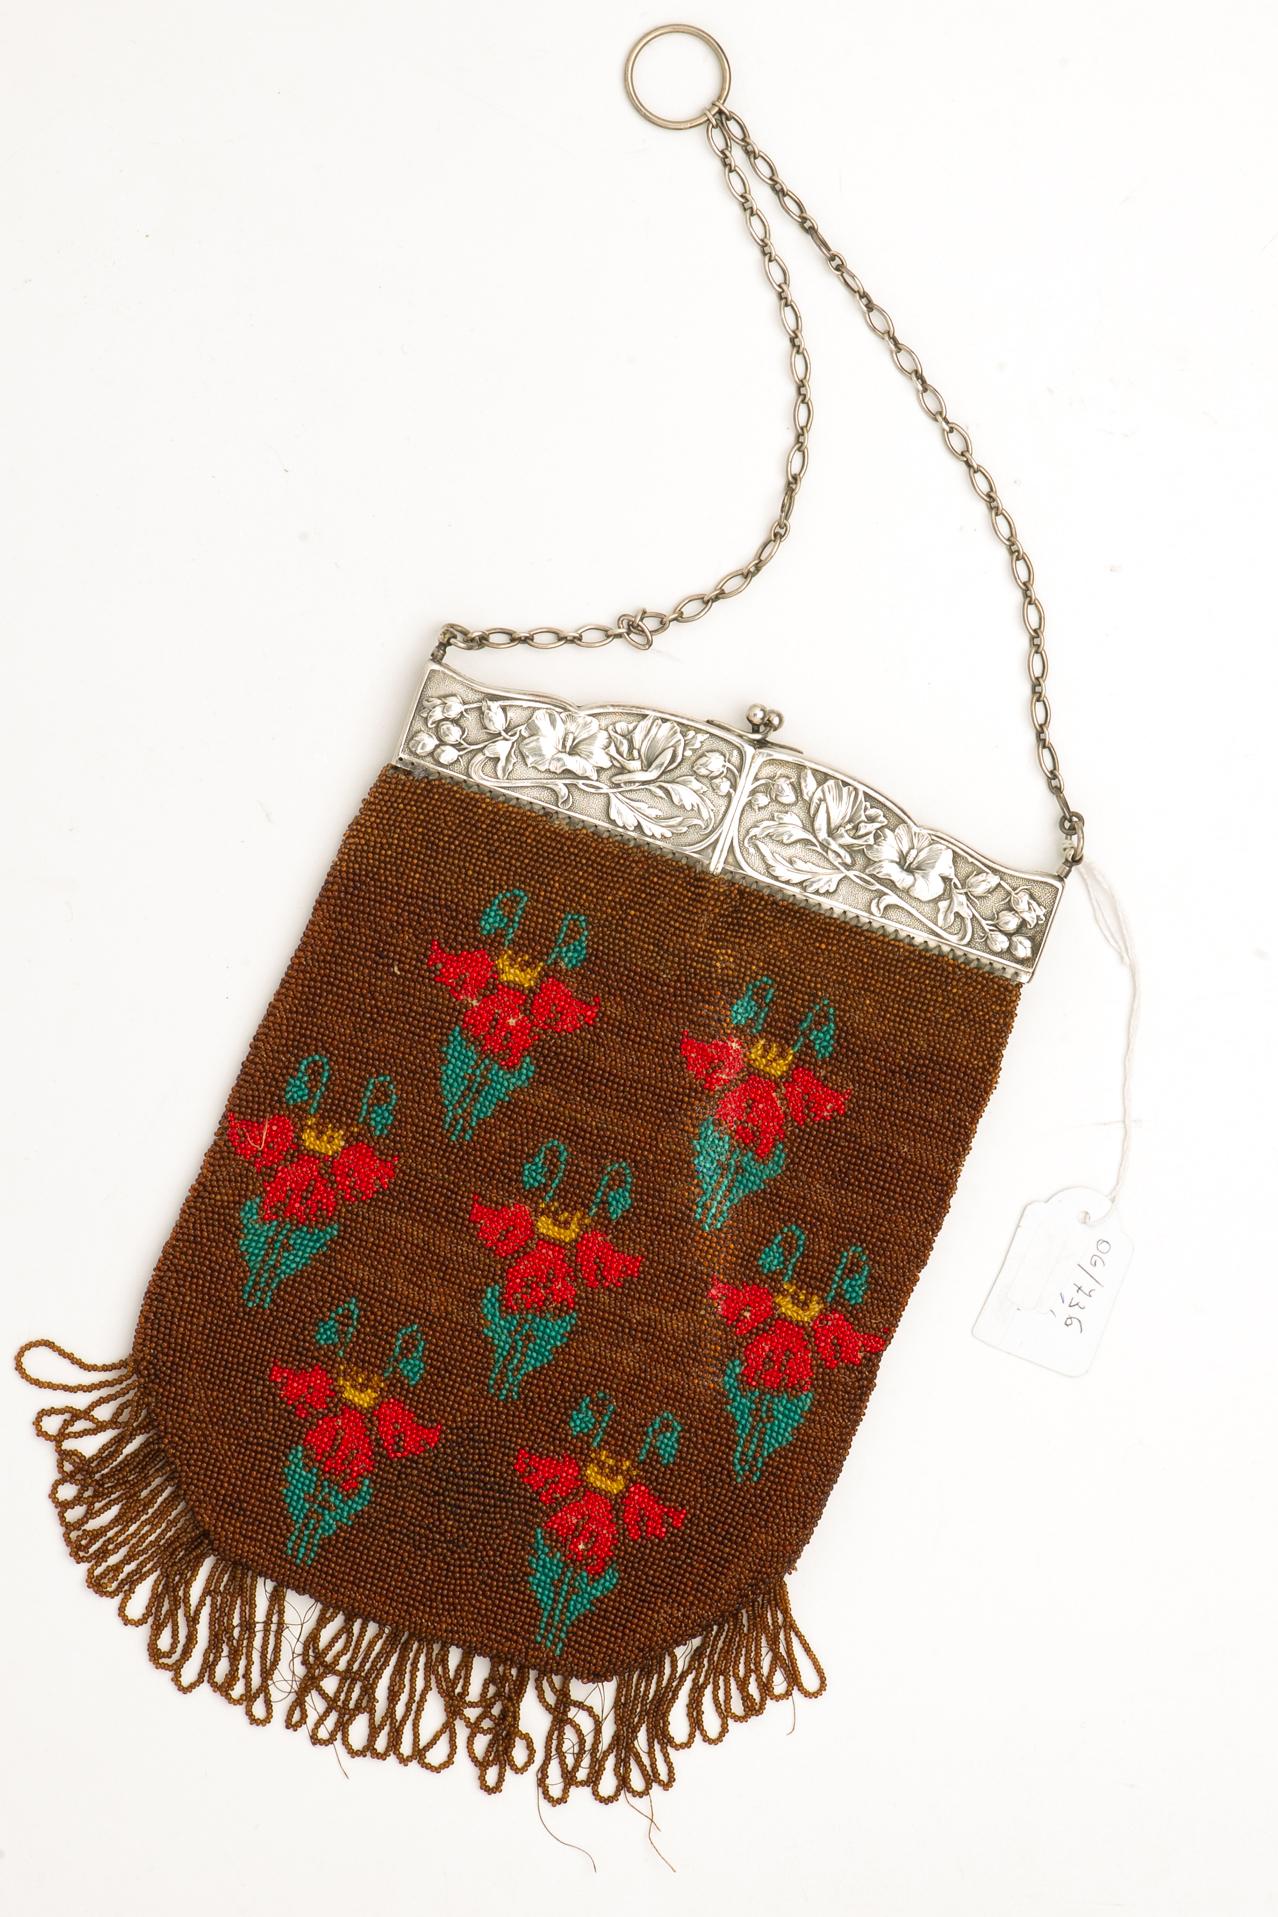 Choose among three evening bags: the price is the same for everyone.
1) Chestnut brown jais sweater, with red and green flowers; silver metal closure with double opening; Liberty period (or after) and original flowered lining, perfectly in order.